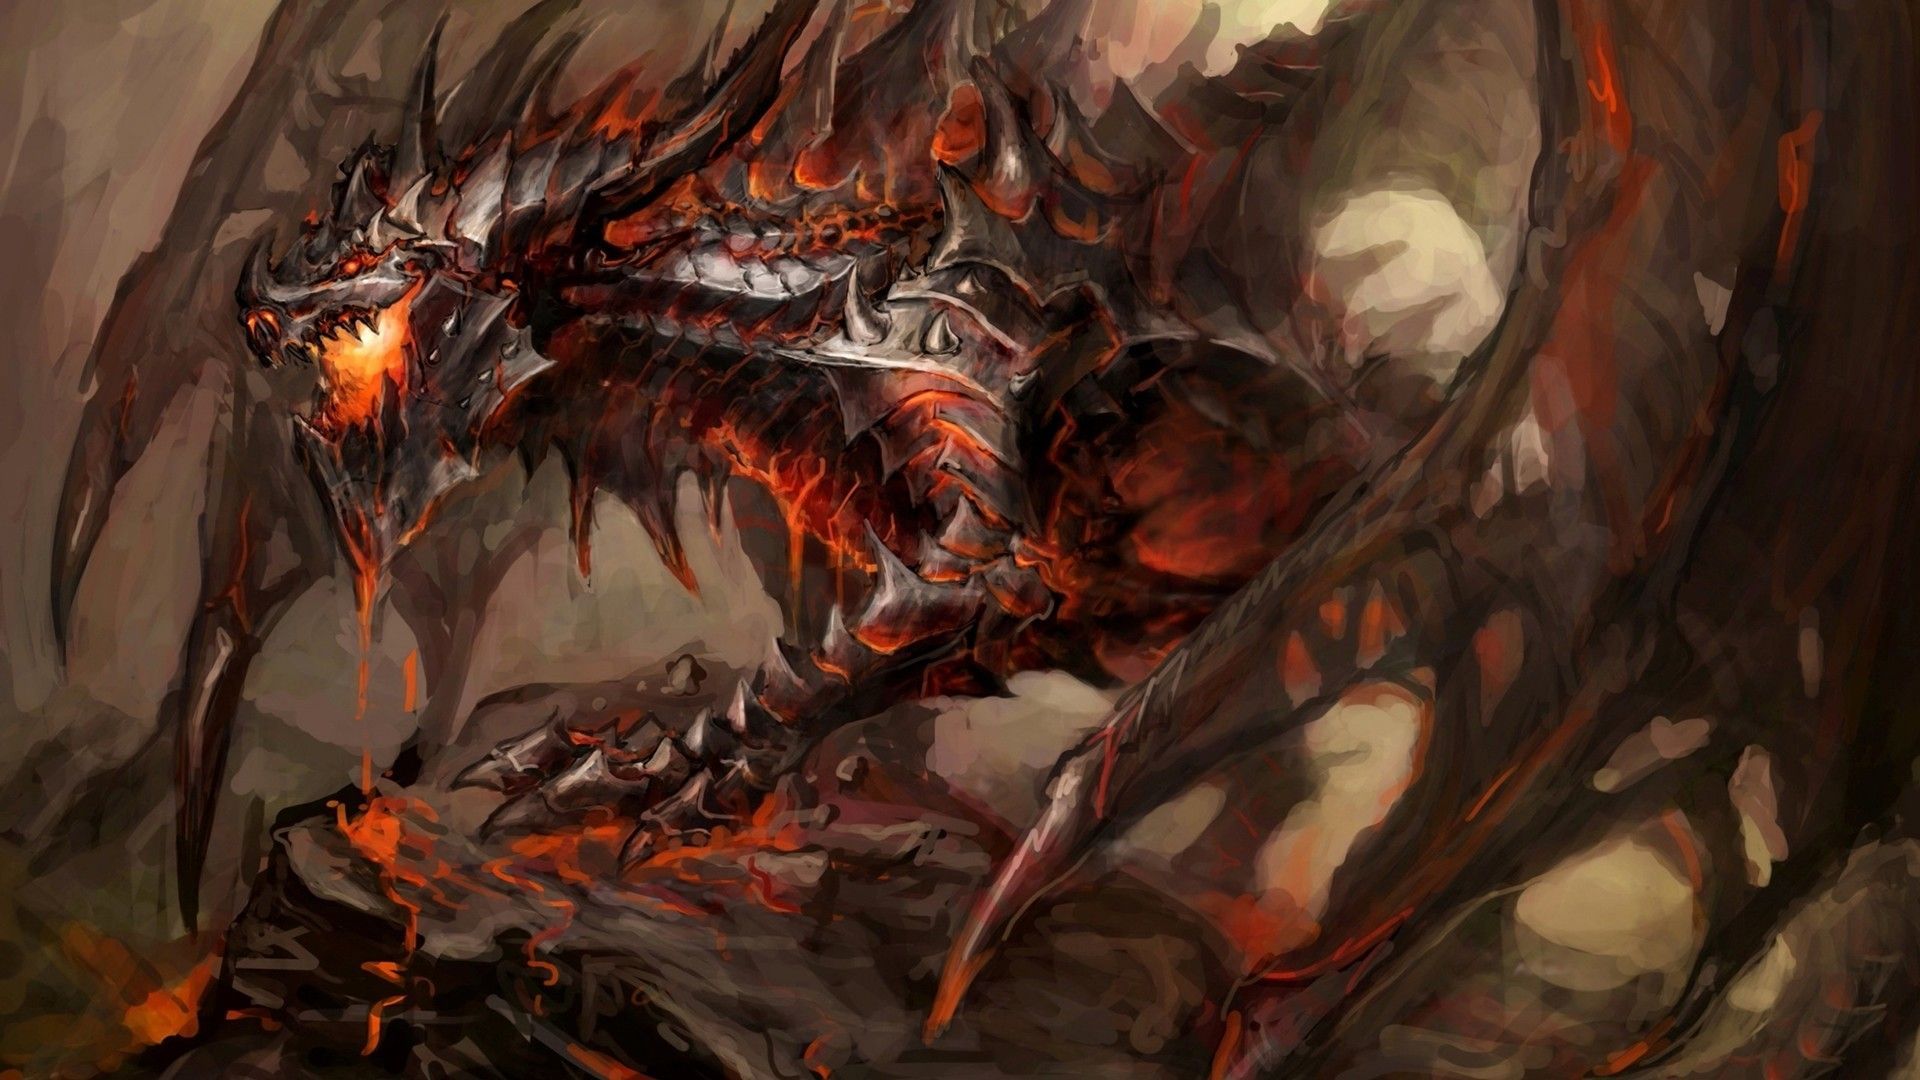 Hell Dragon Wallpaper Free Hell Dragon Background